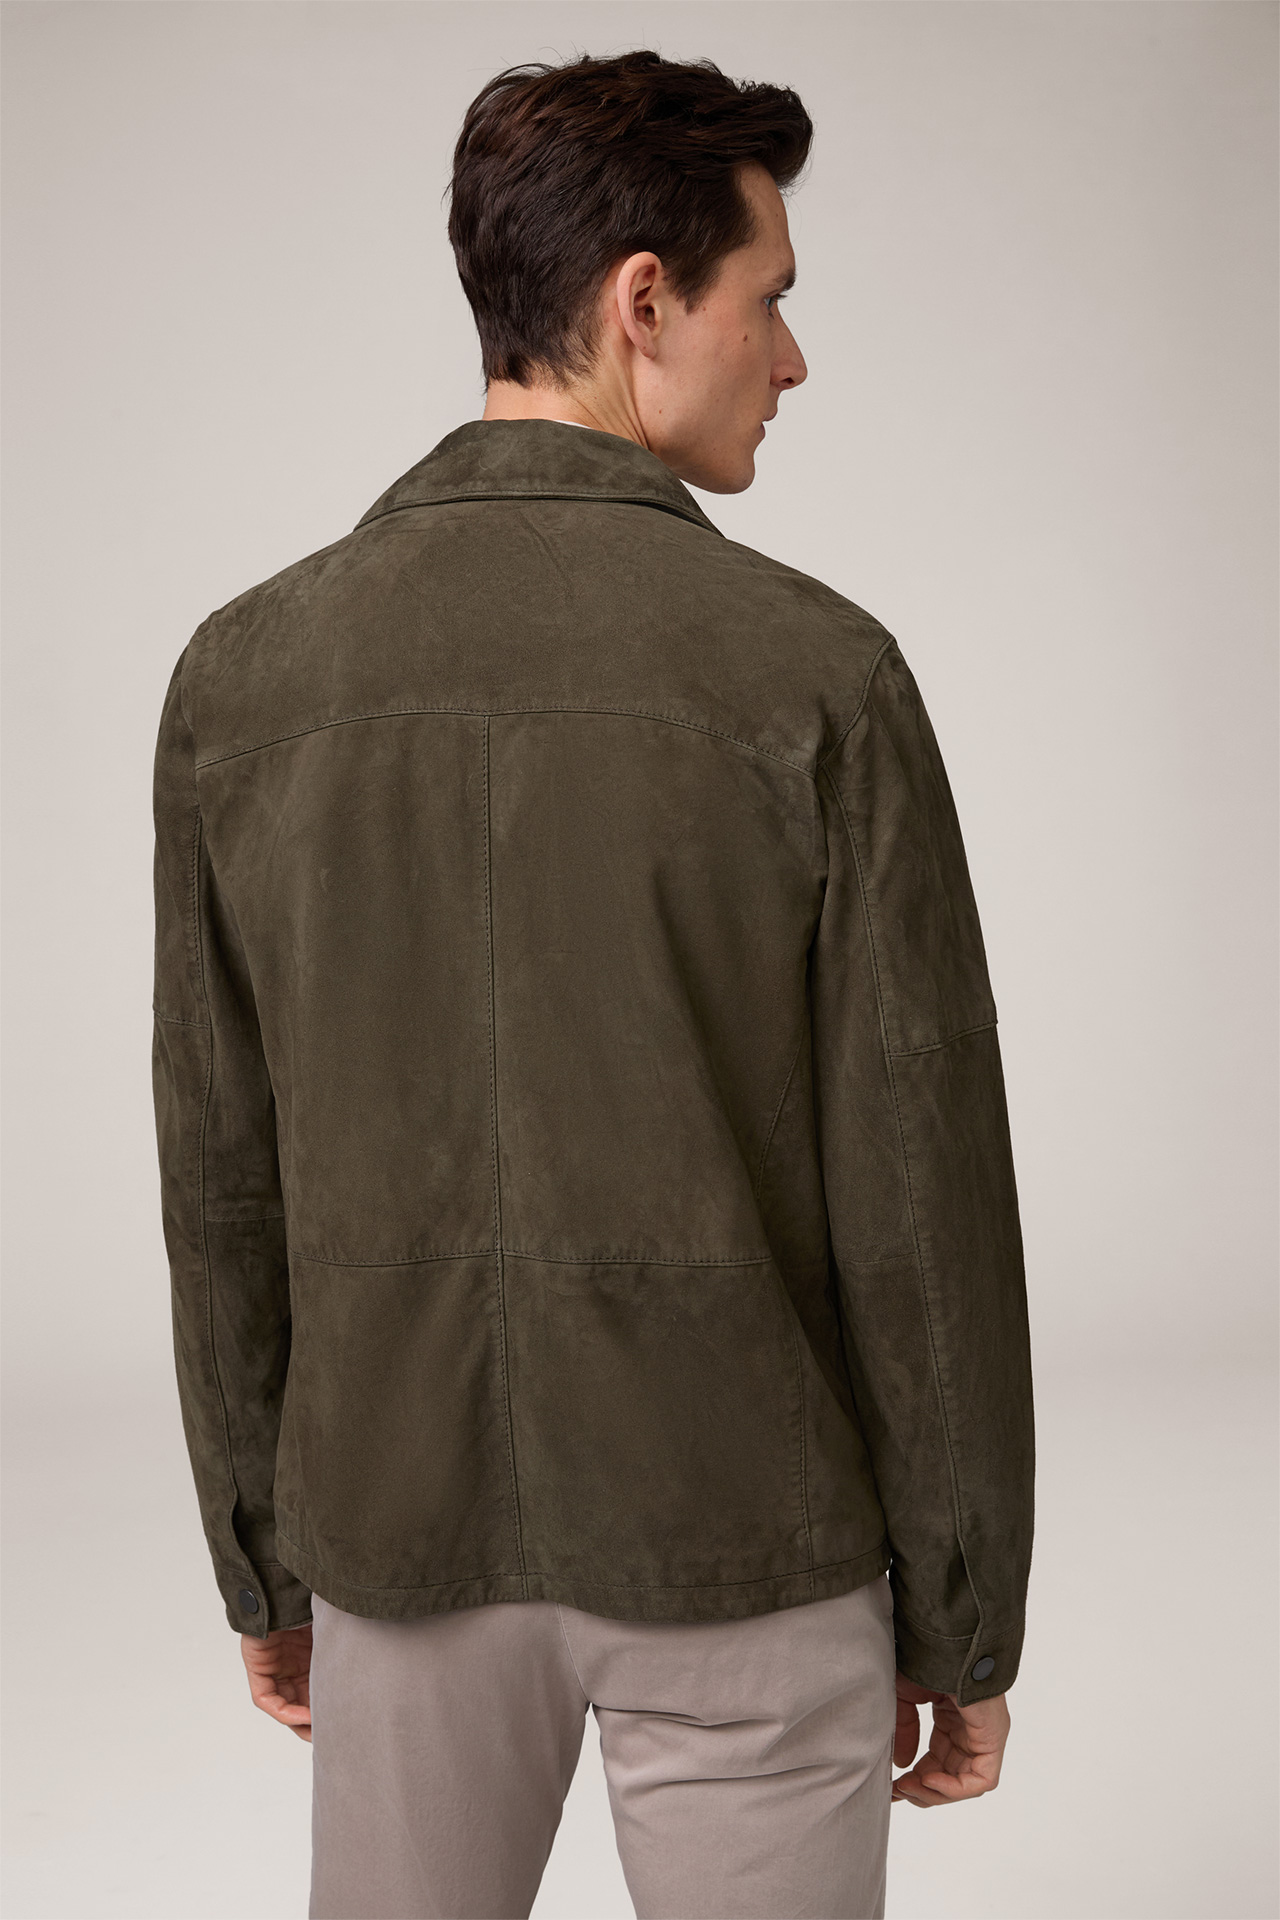 Oriolo Goatskin Suede Leather Jacket with Shirt Collar in Olive